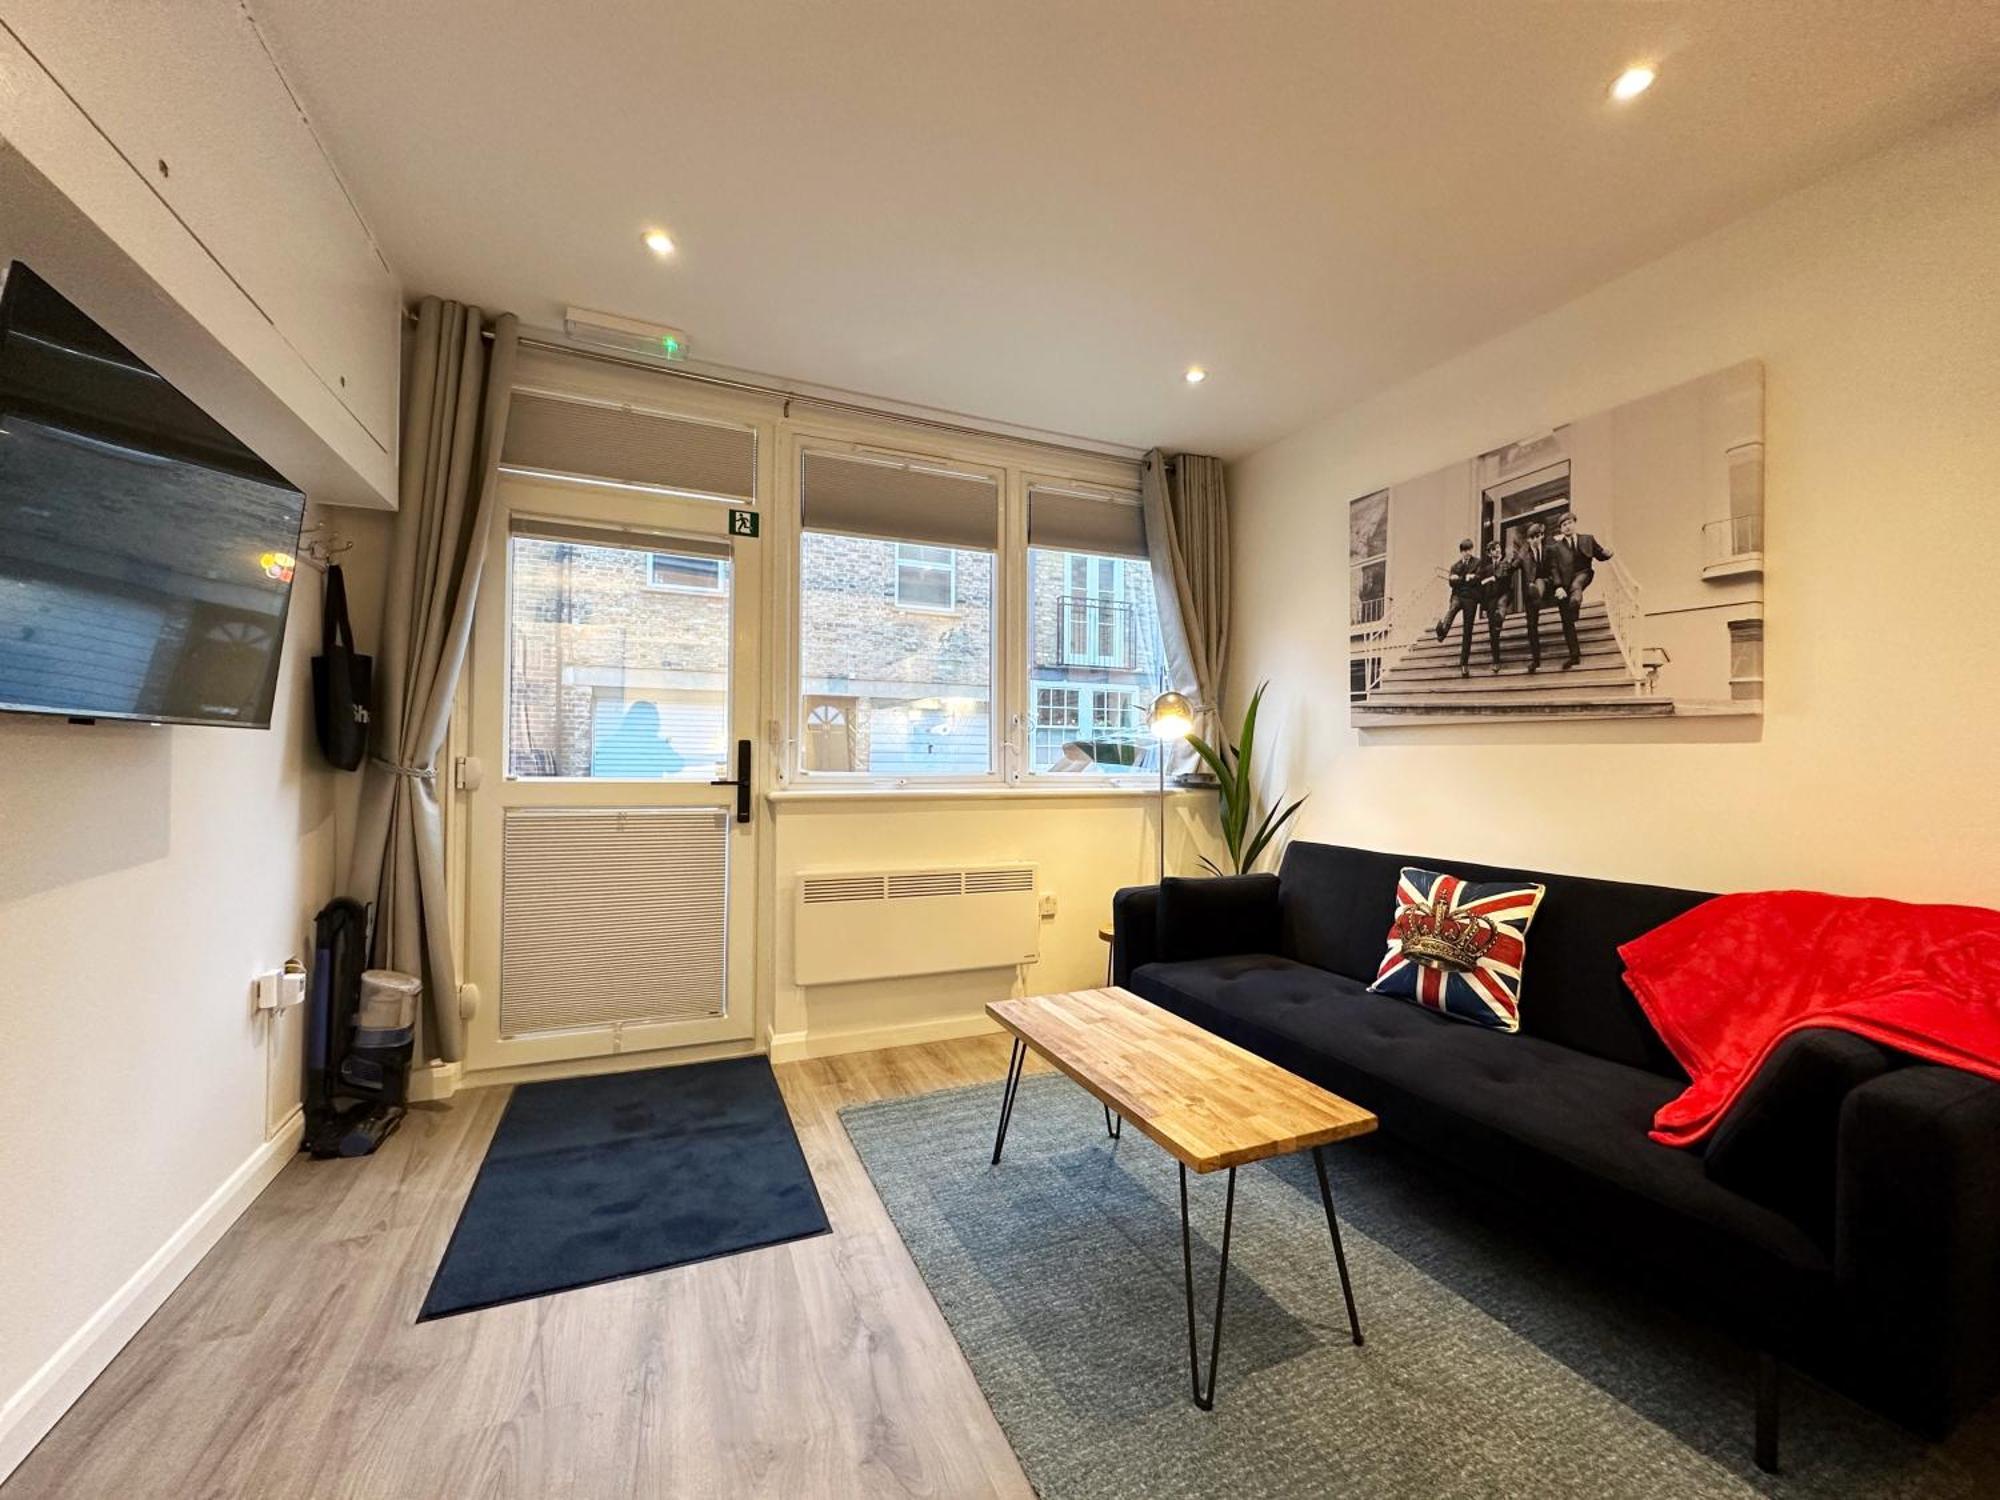 Kensington Studio Hosted By Airoperate Near Notting Hill - 1 Double Bed , 1 Sofa Bed, Ground Floor Apartment Via Private Entrance 伦敦 外观 照片